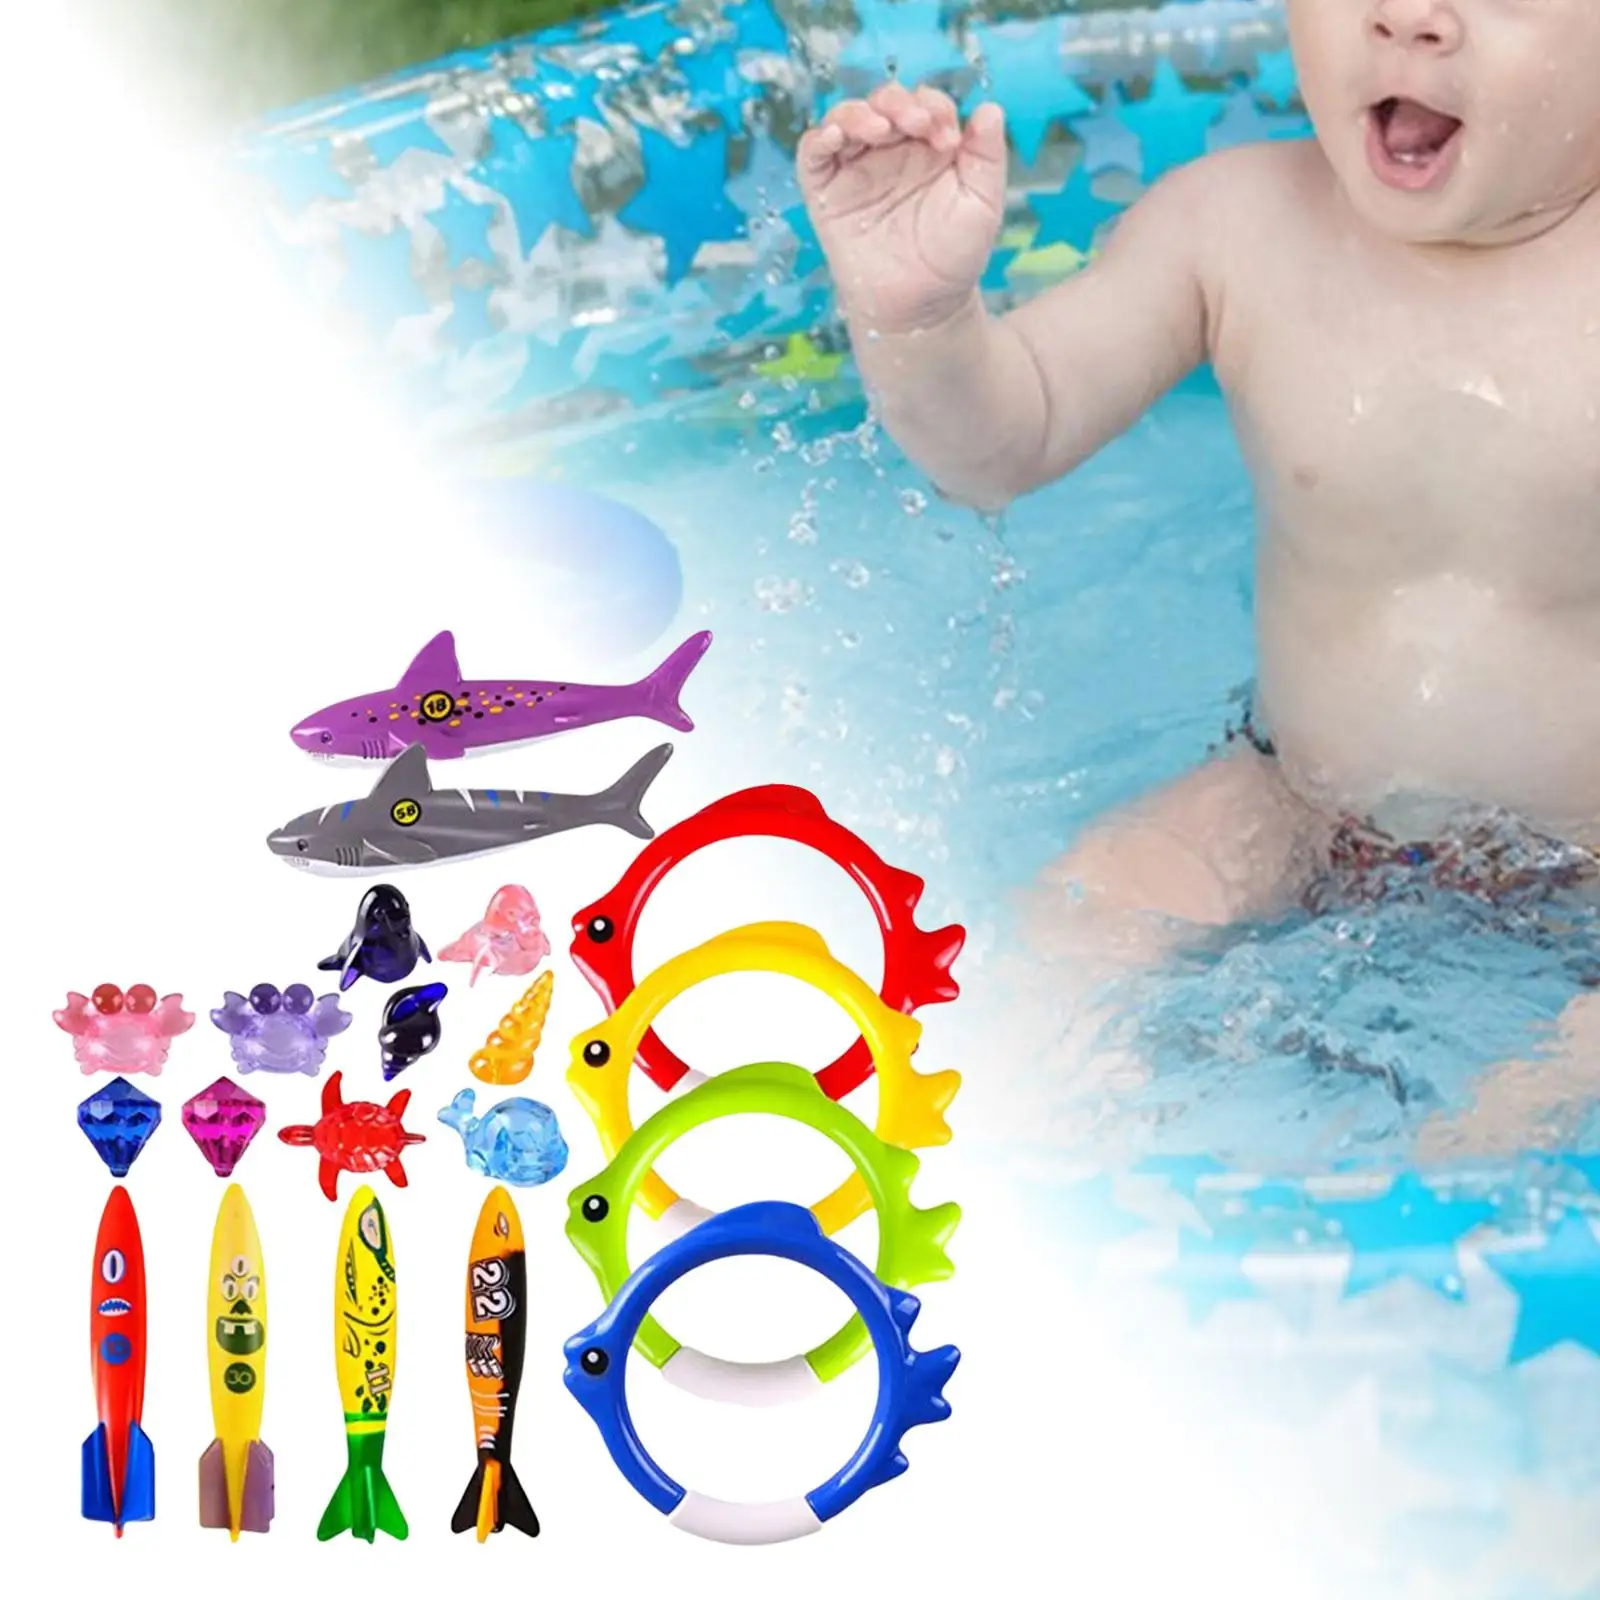 20x Diving Toys Party Favors Gems Underwater Dive Gifts Fun Swim Games Sinking Set for Pool Schools Beach Boys Girls